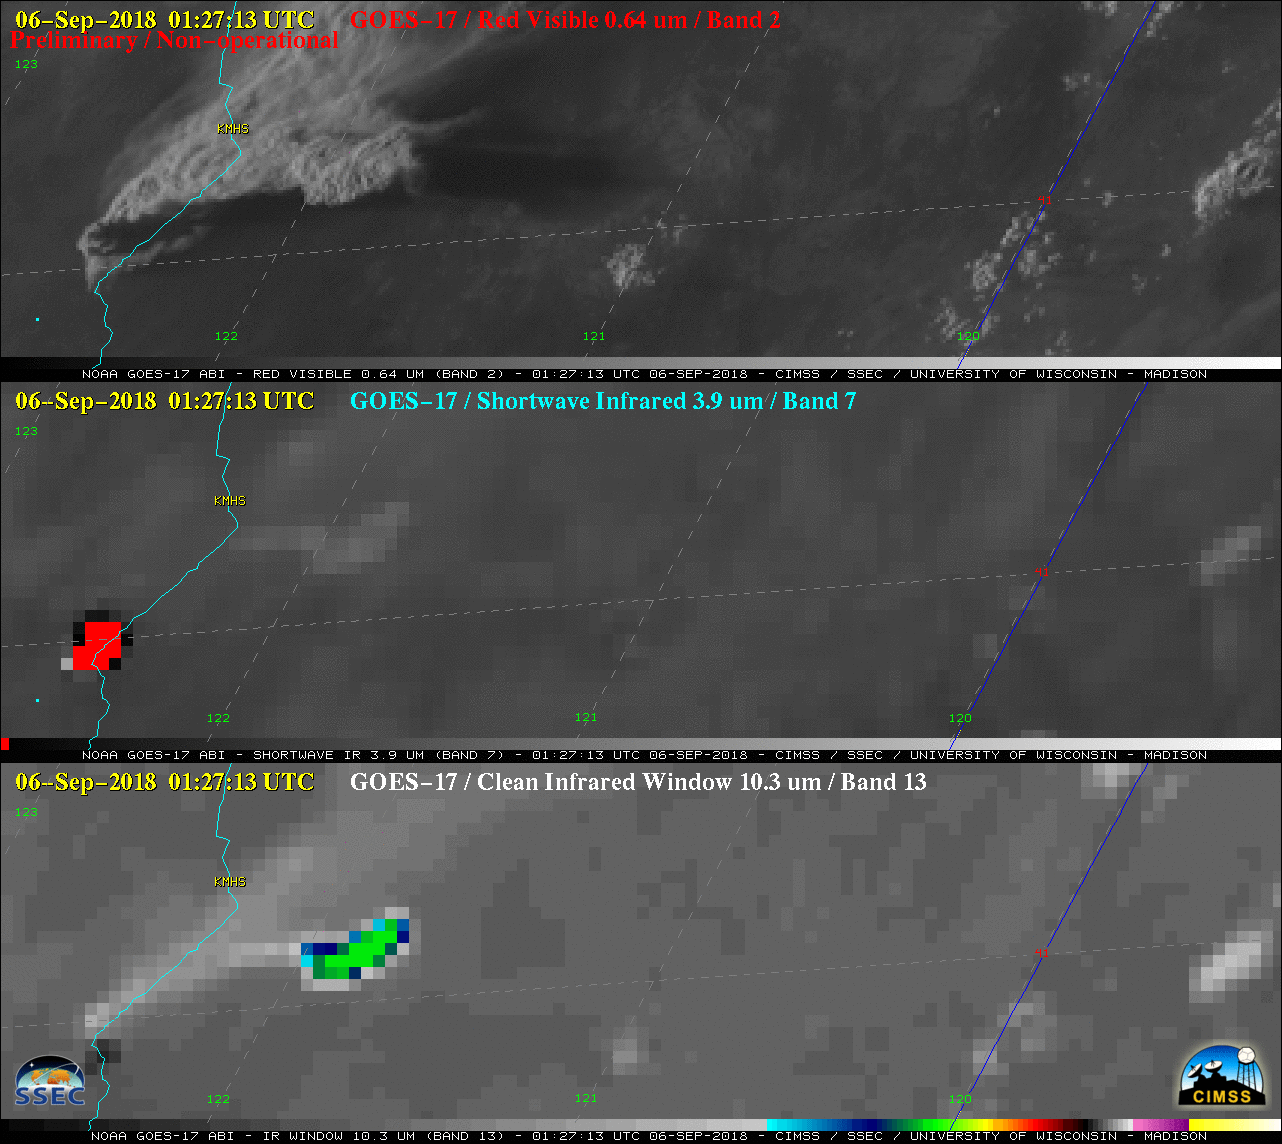 GOES-17 "Red" Visible (0.64 µm, top), Shortwave Infrared (3.9 µm, middle), "Clean" Infrared Window (10.3 µm, bottom) images; Interstate 5 is plotted in cyan [click to play animation | MP4]